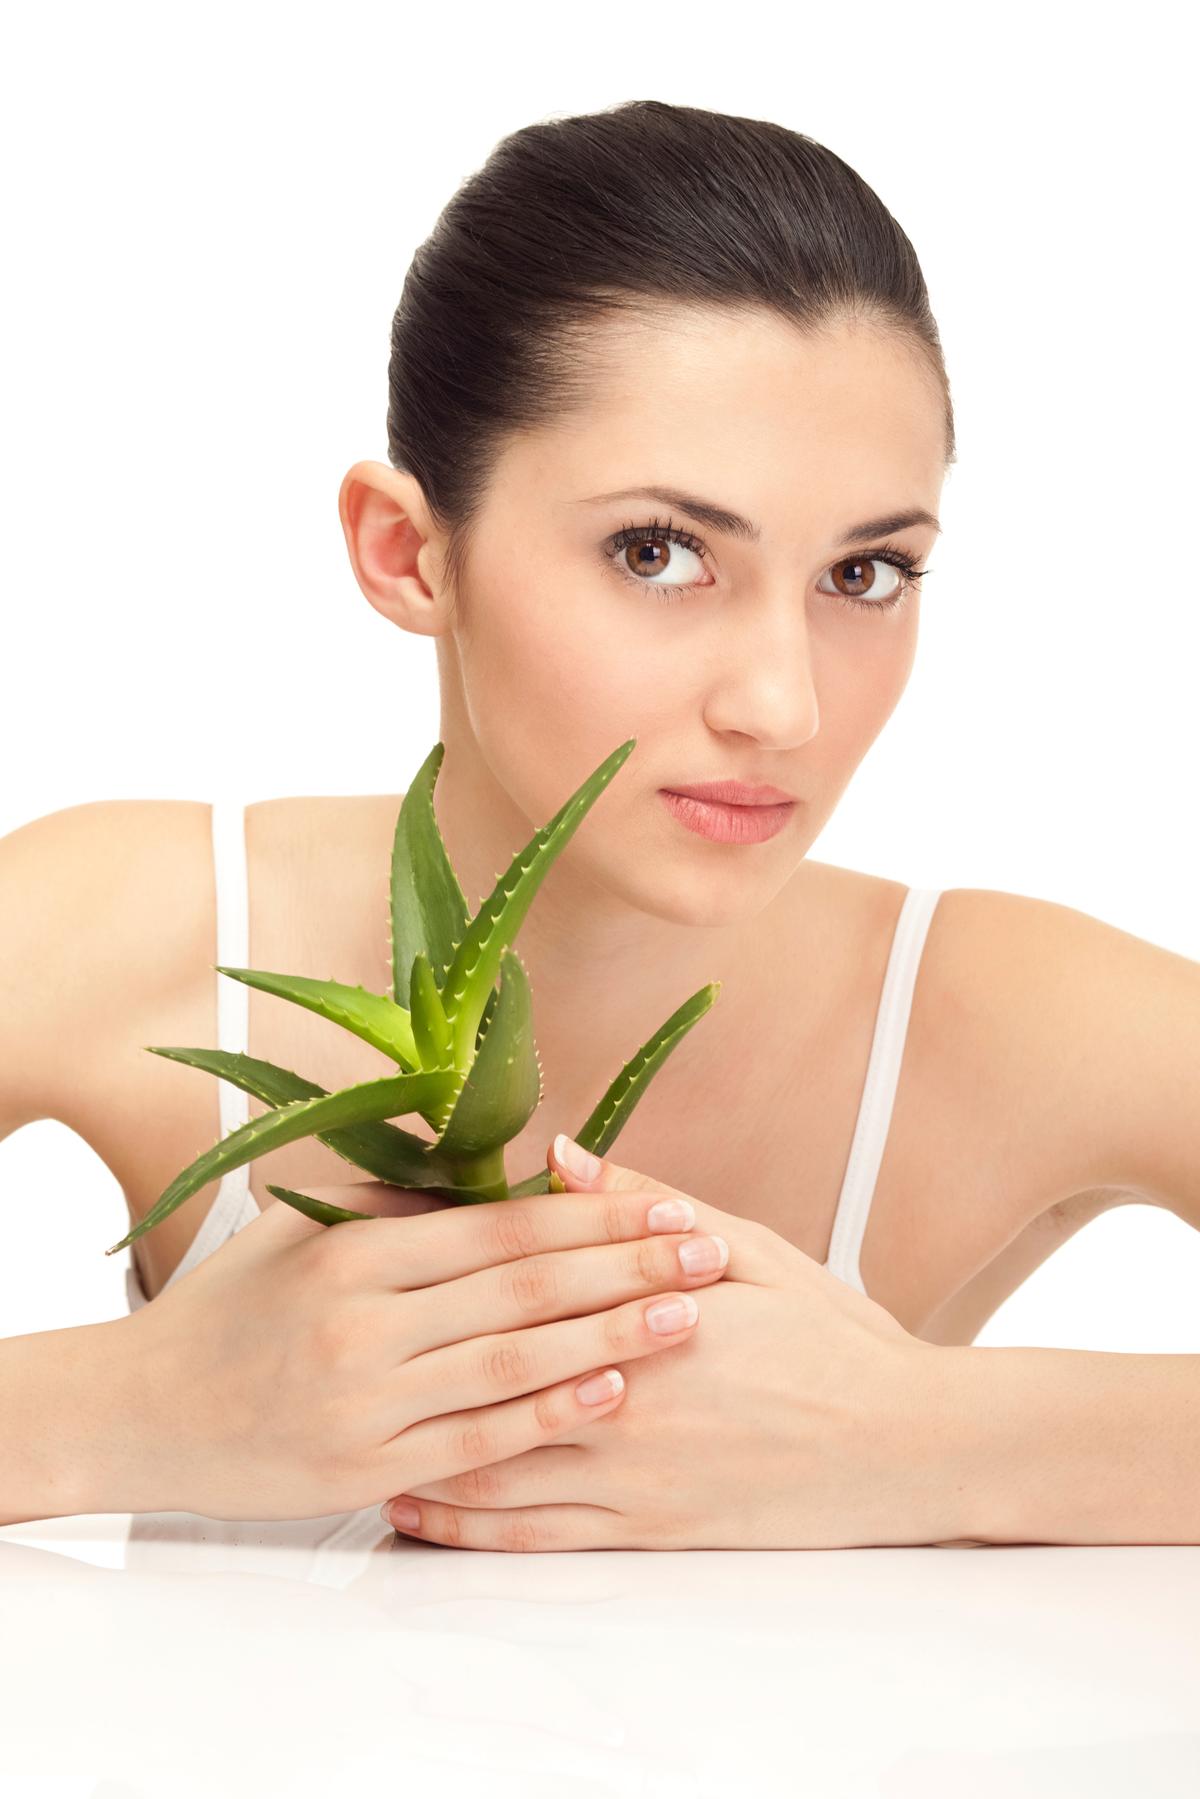 Aloe vera is such a healing plant because it addresses the core reasons most people are sick. (LuckyBusiness/iStock)